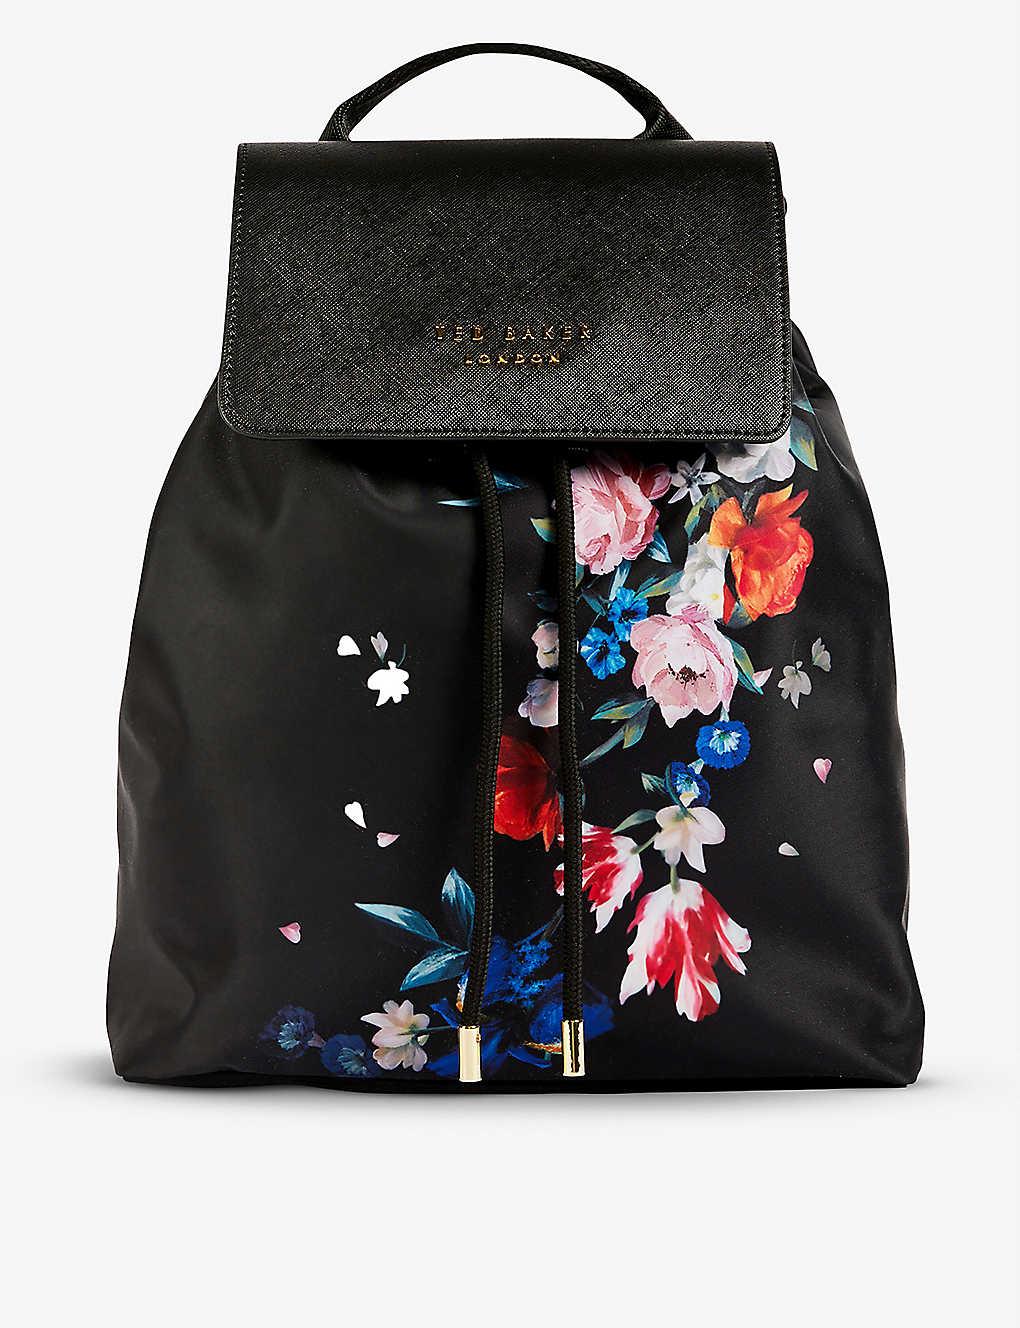 Ted Baker Bags for Women - Shop on FARFETCH